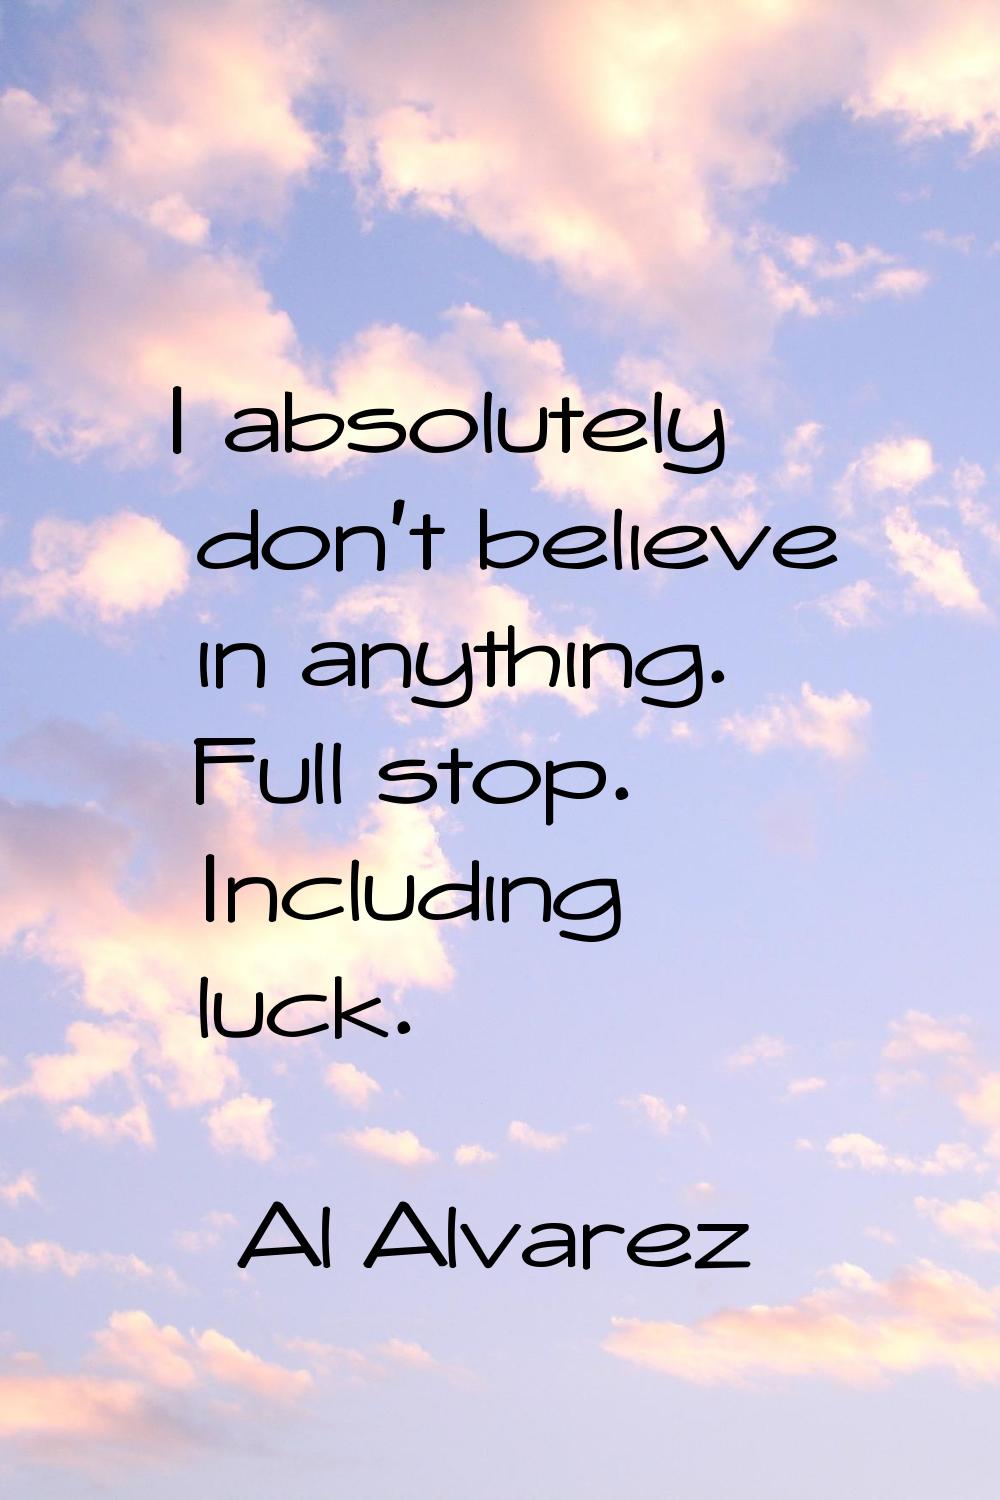 I absolutely don't believe in anything. Full stop. Including luck.